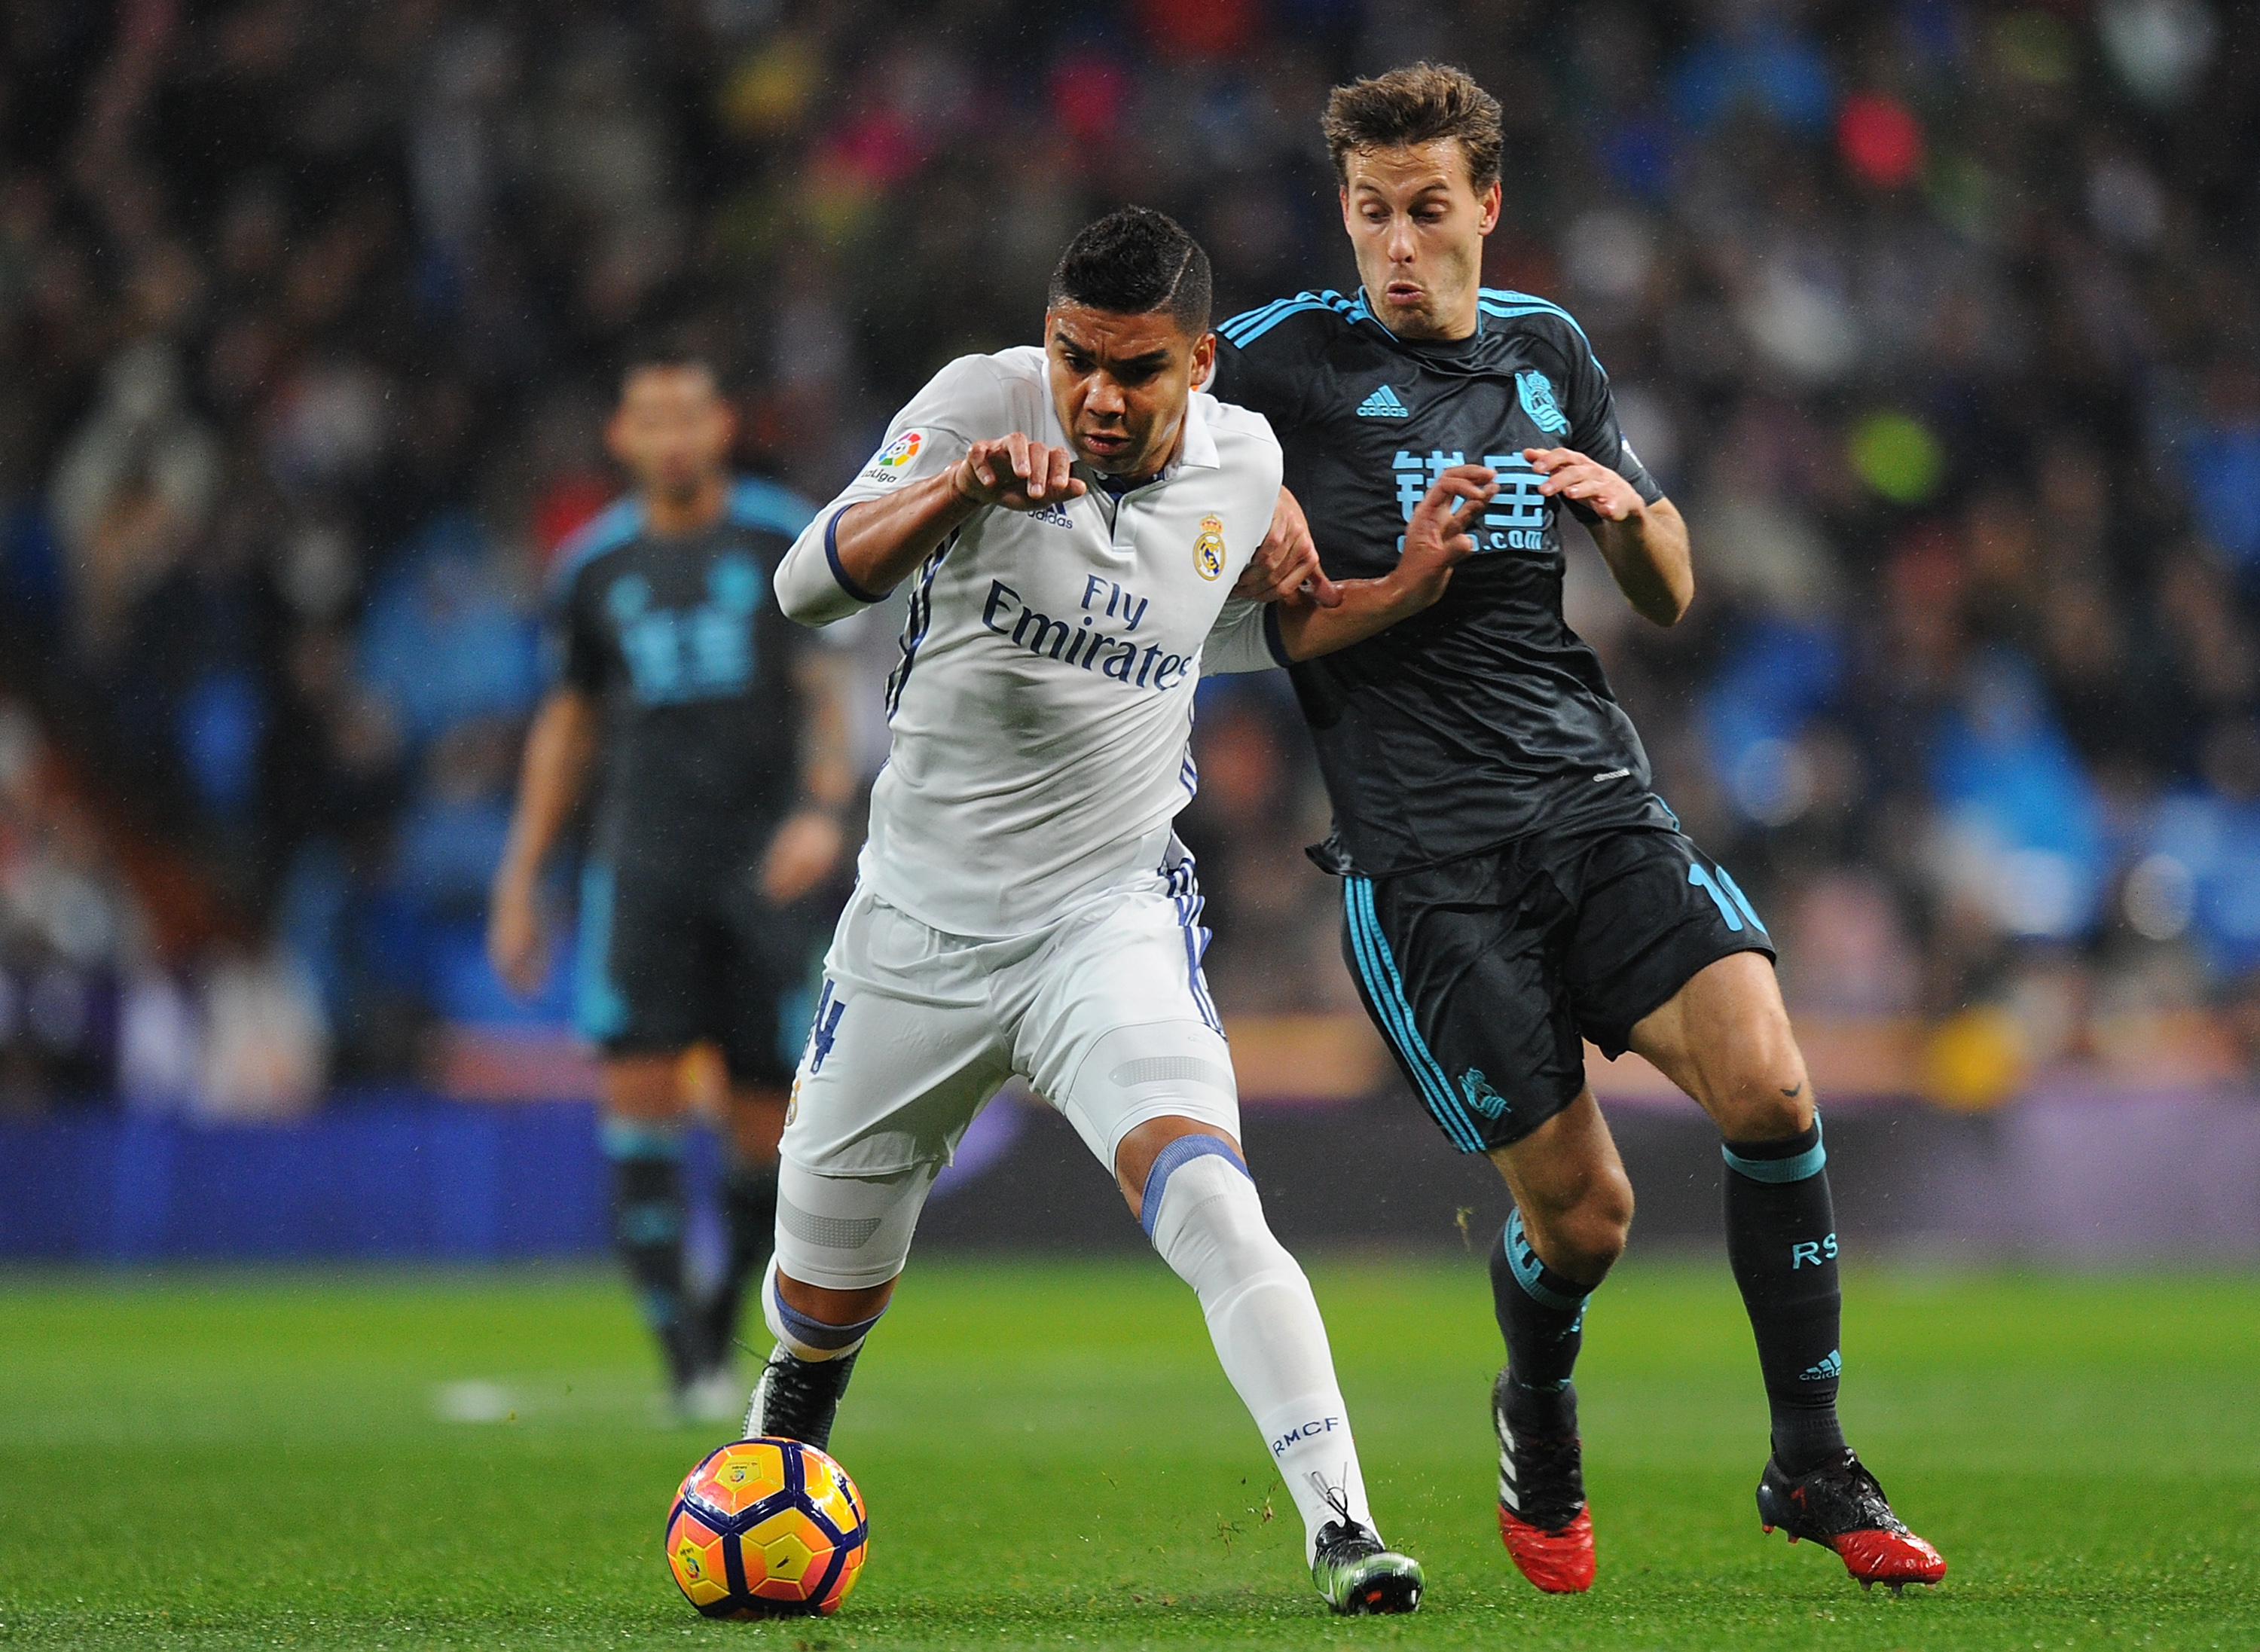 Real Madrid's Casemiro battles with Real Sociedad's Sergio Canales in a La Liga game in January 2017.